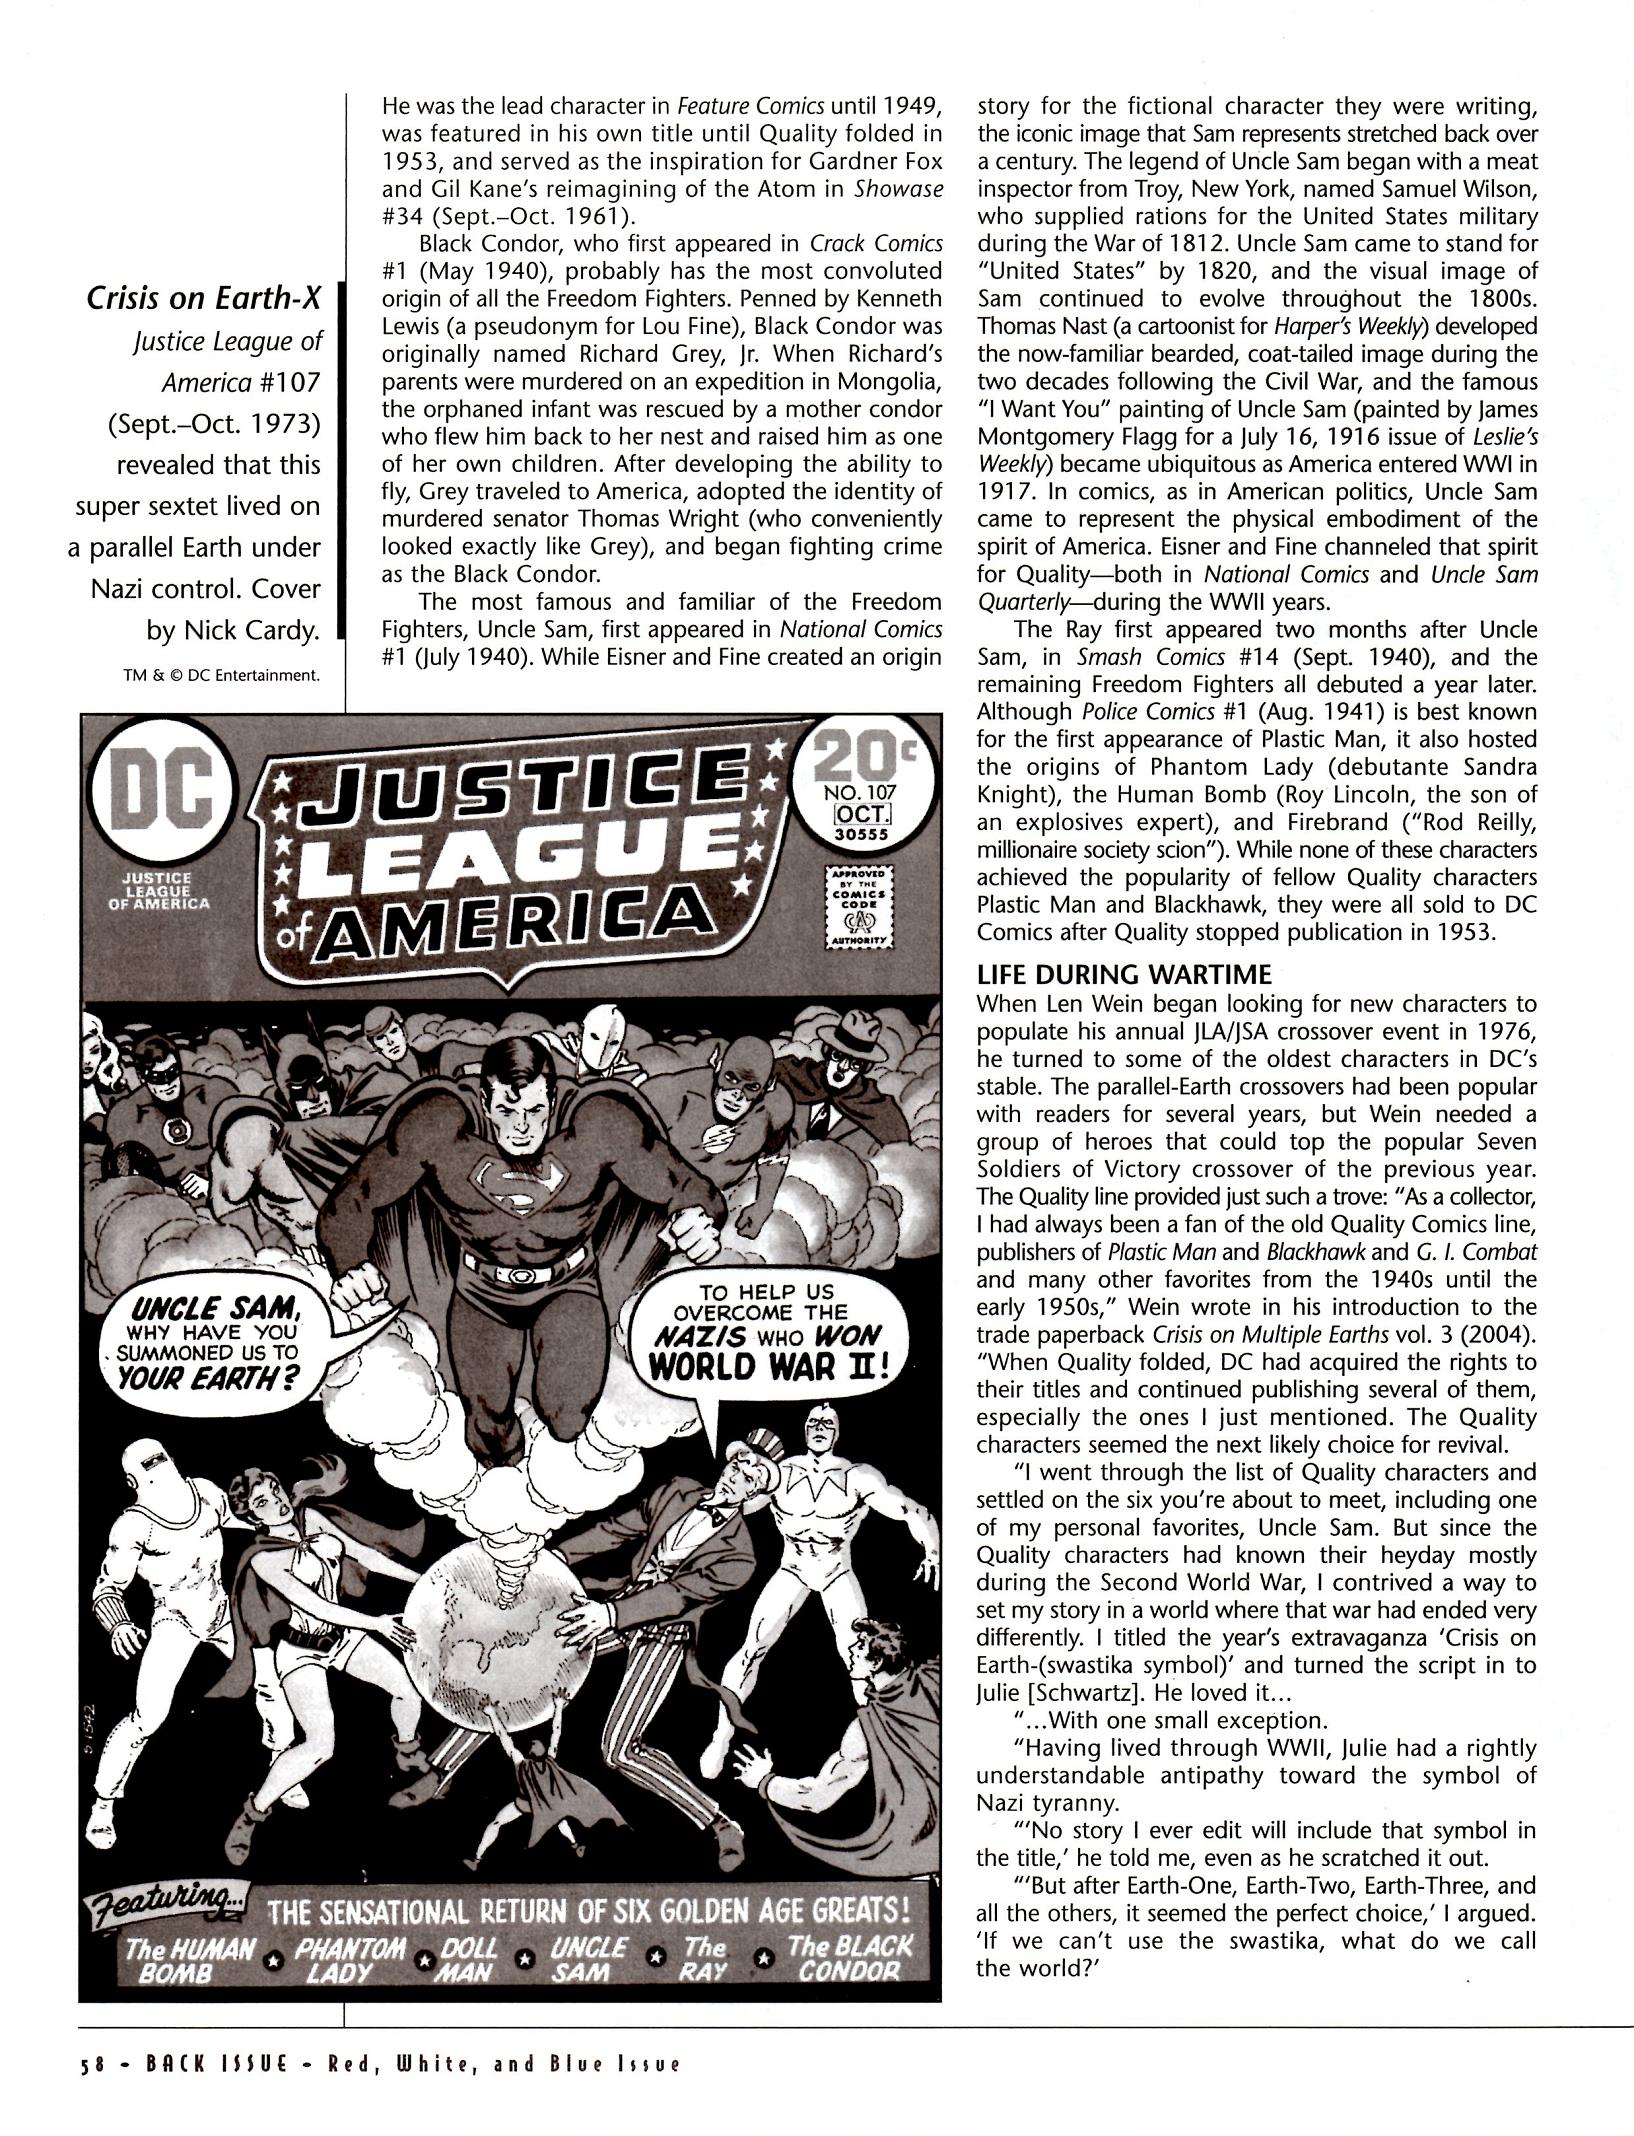 Read online Back Issue comic -  Issue #41 - 60